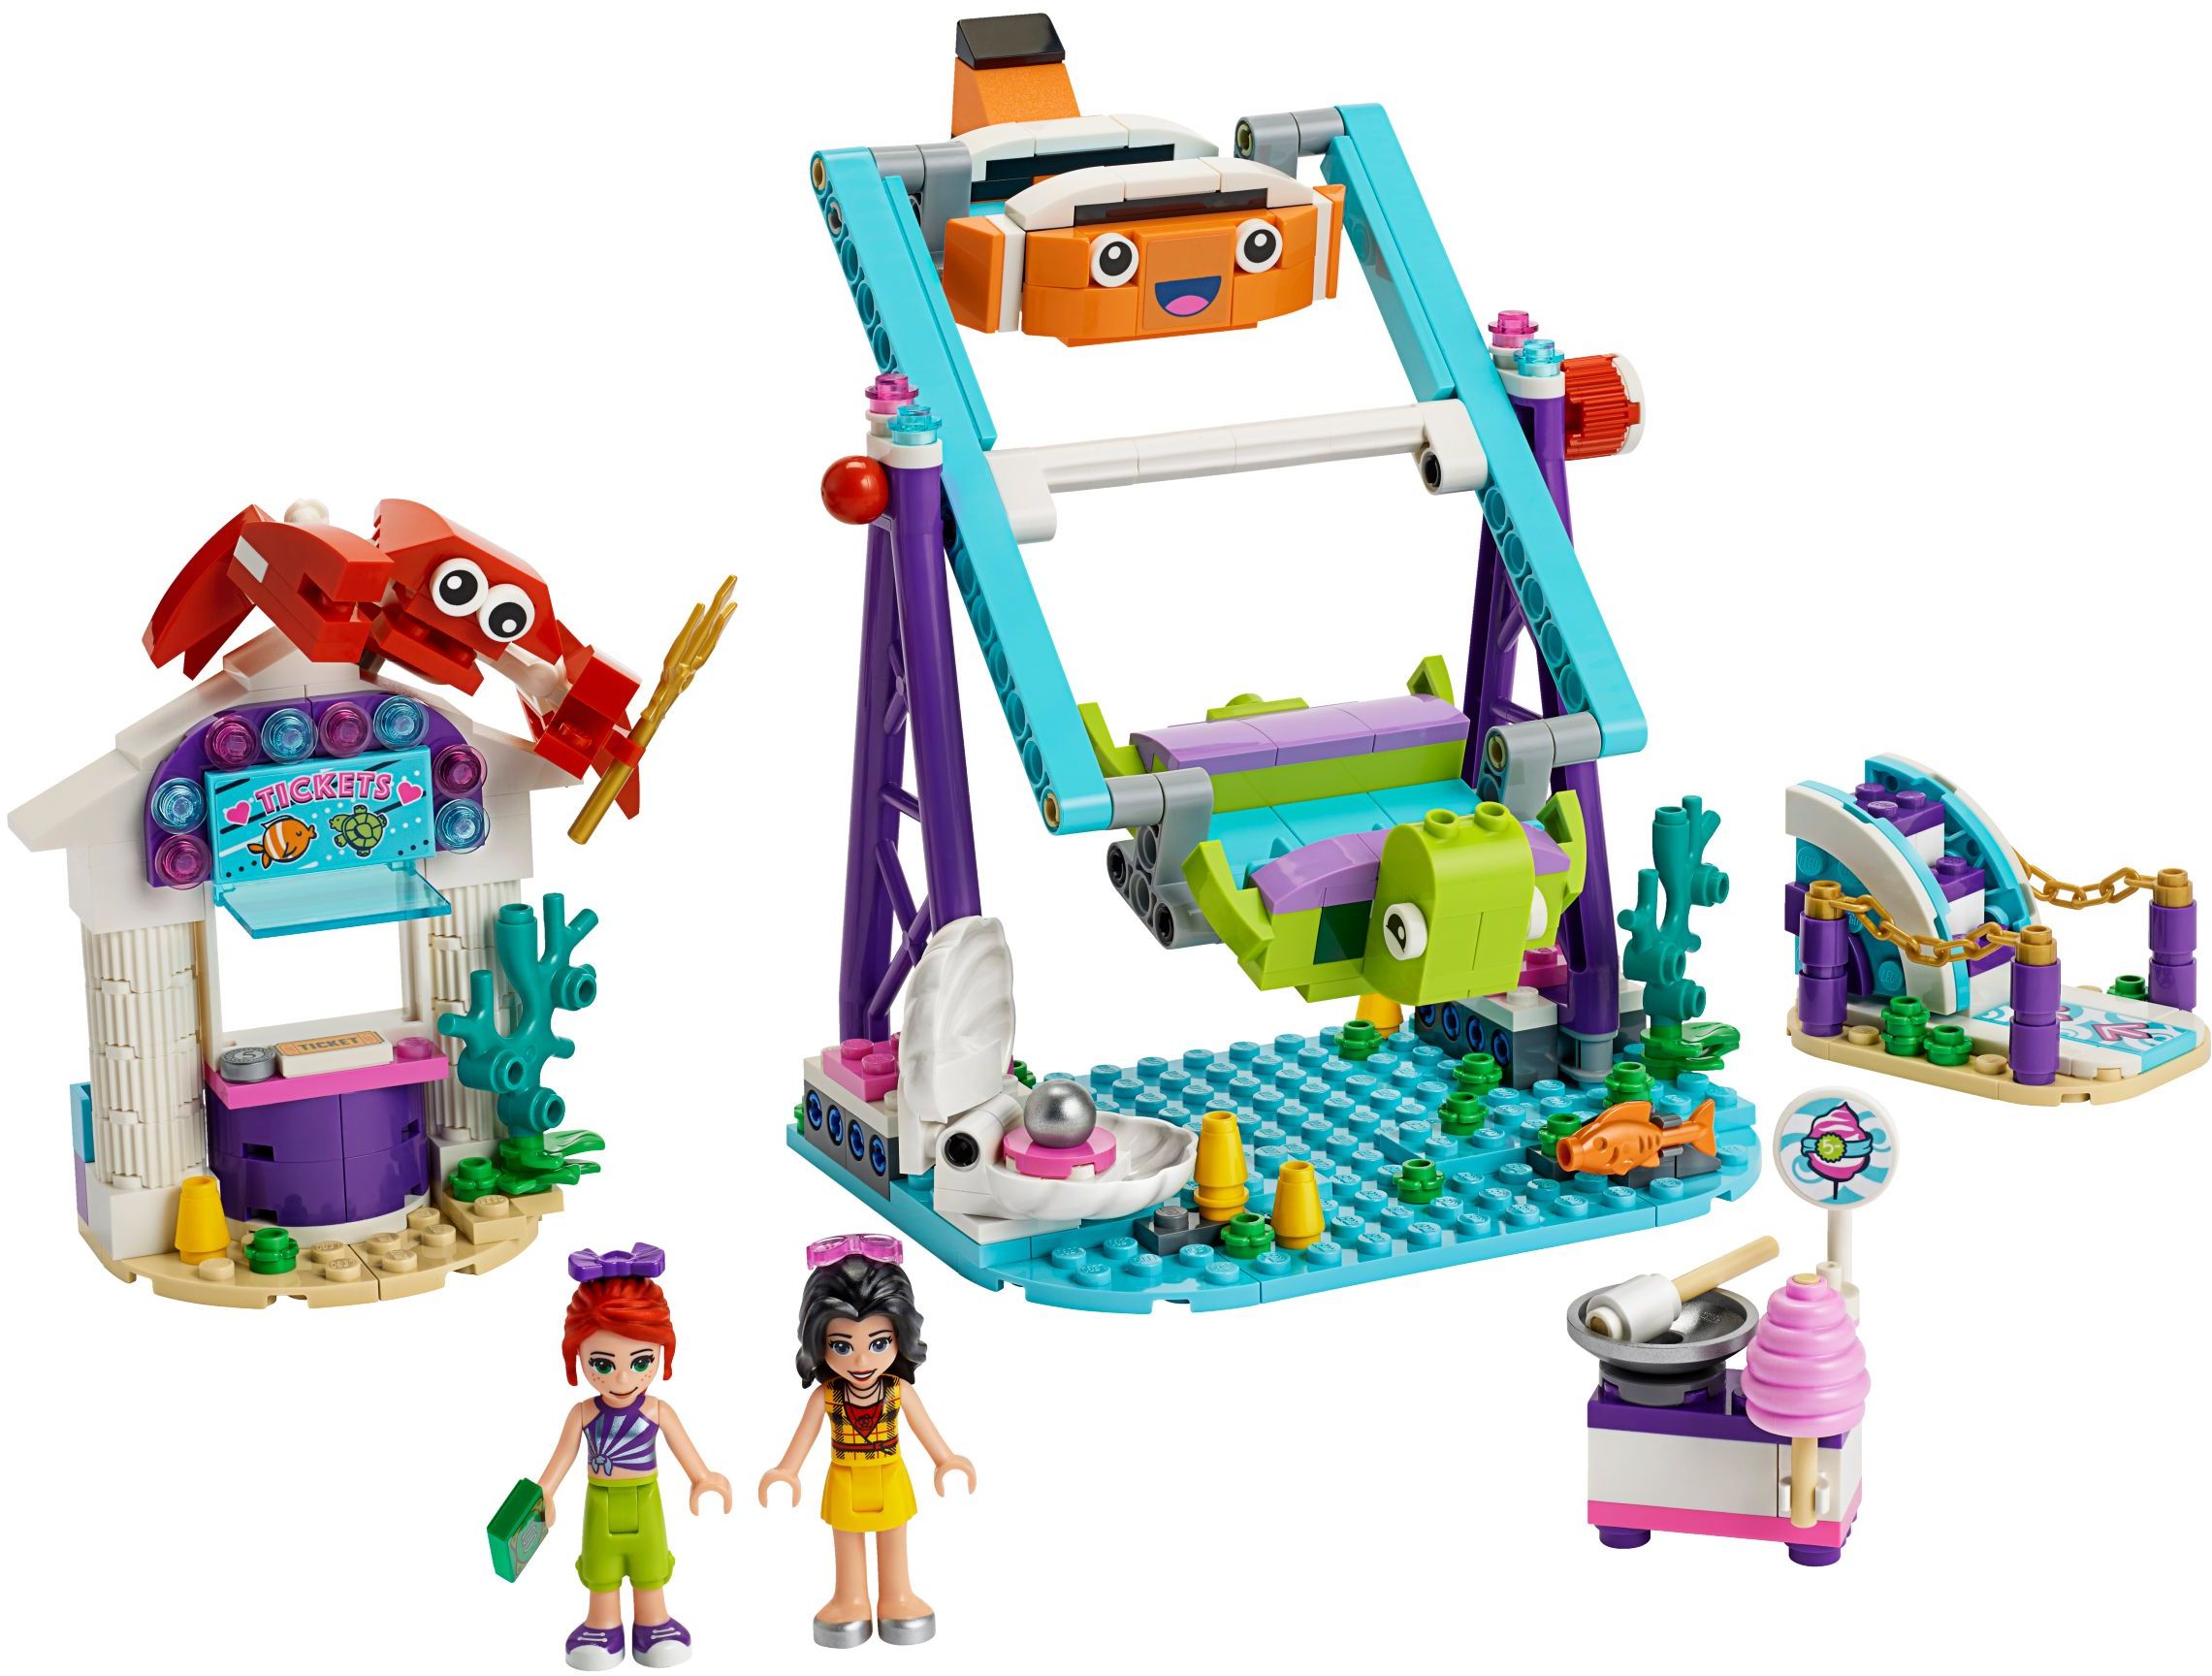 new lego friends sets 2019